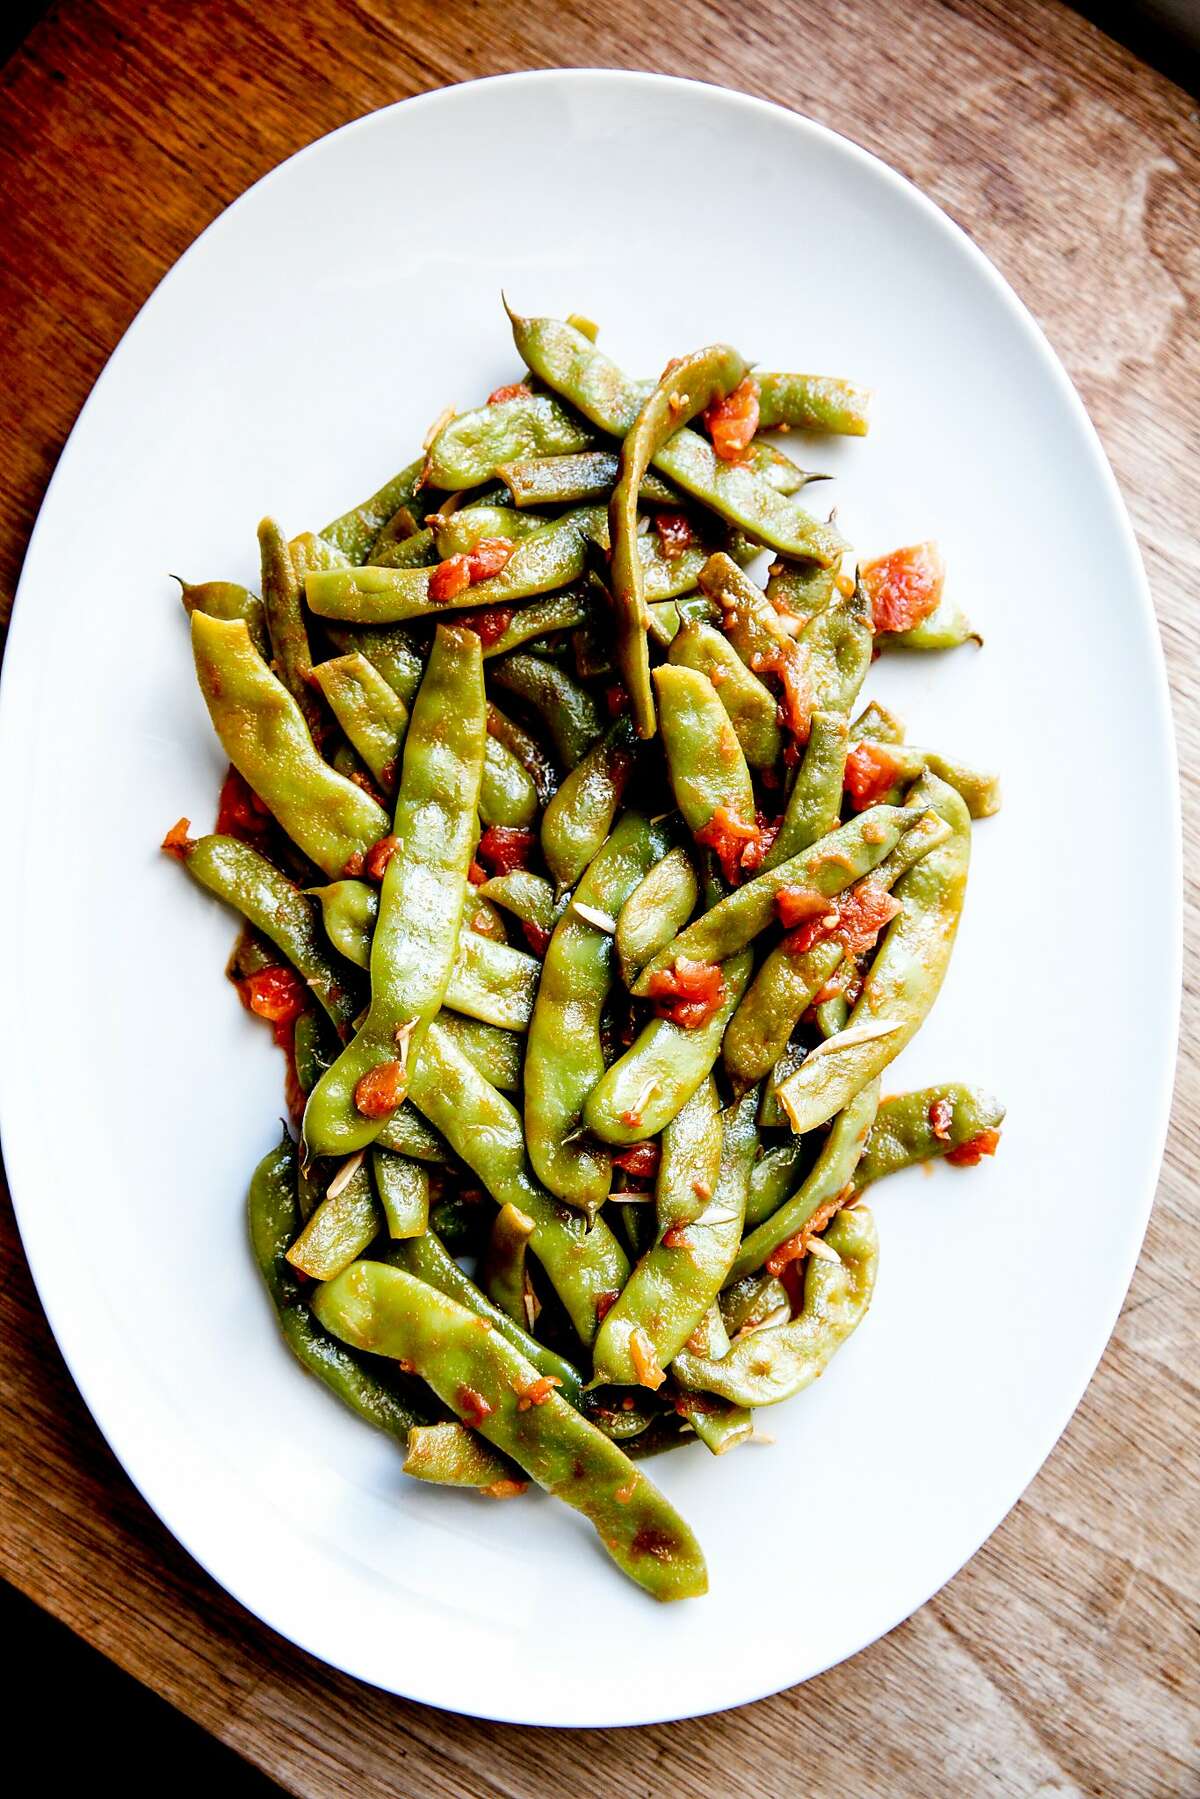 Romano beans smothered in garlicky tomatoes at the home of Molly Watson in San Francisco, Calif., Friday, July 24, 2015.